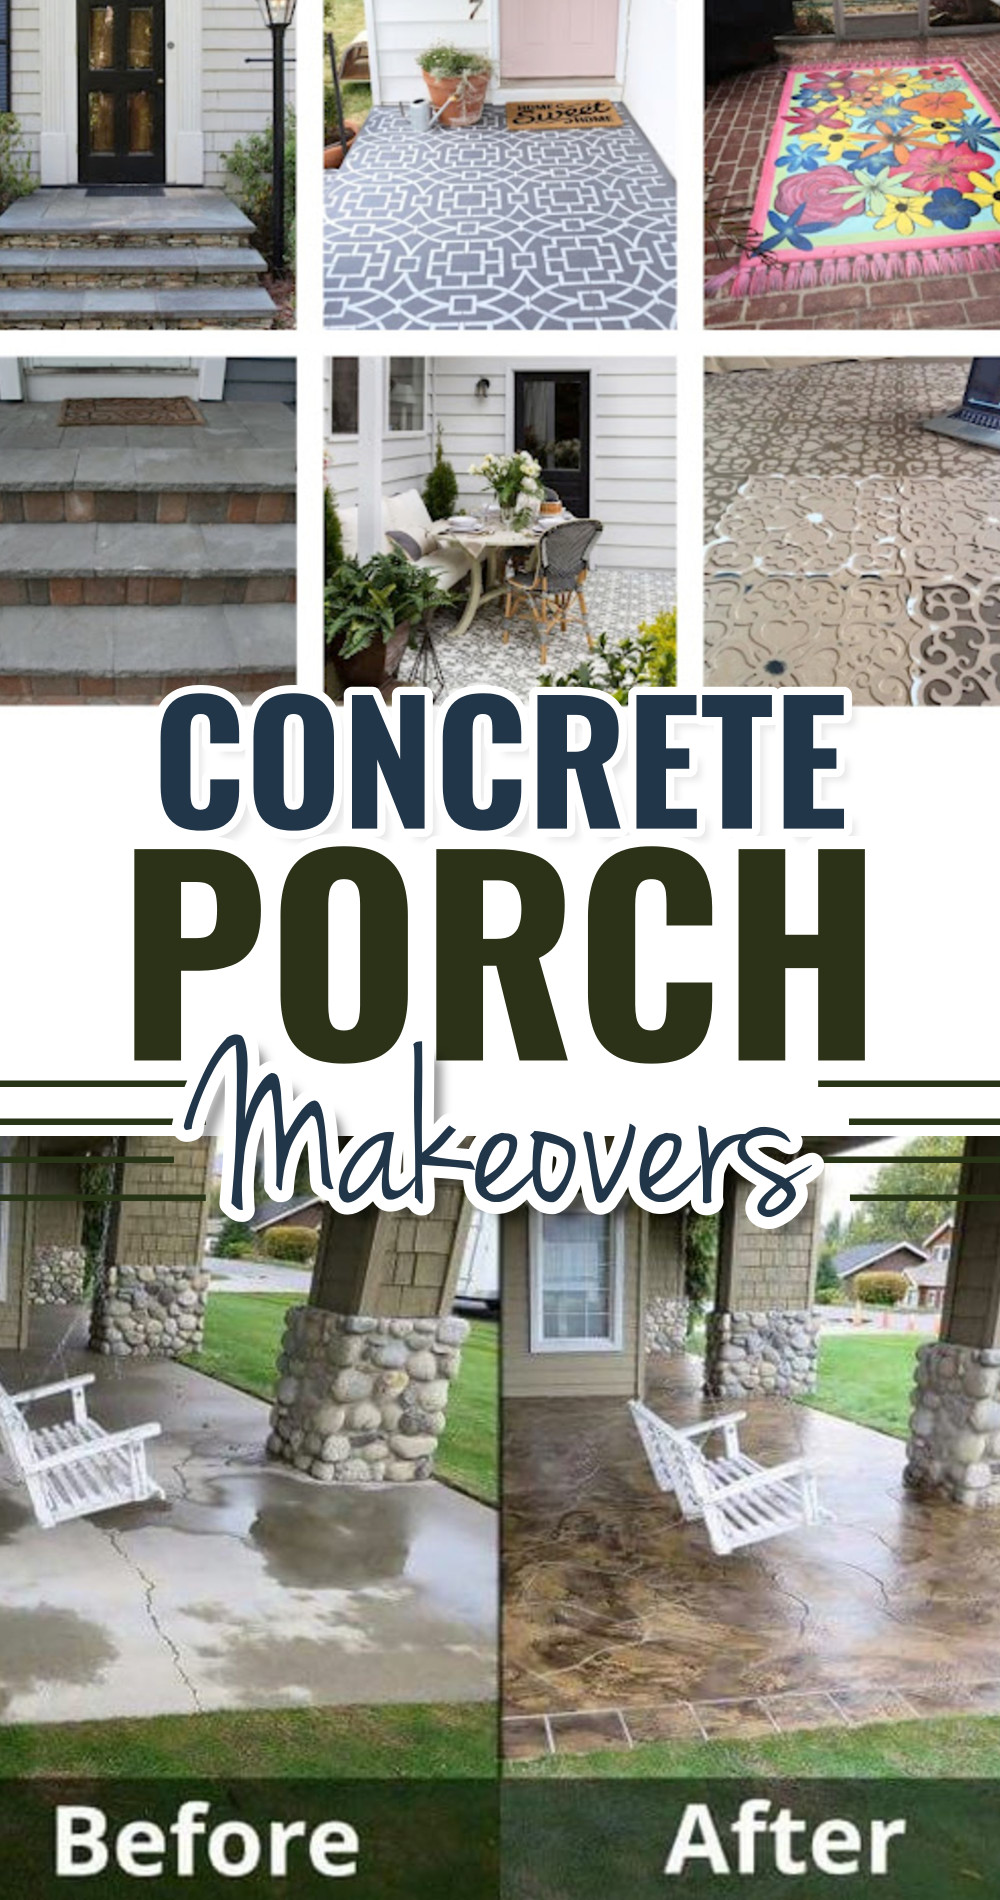 Concrete porch makeovers and cement patio upgrades on a DIY budget